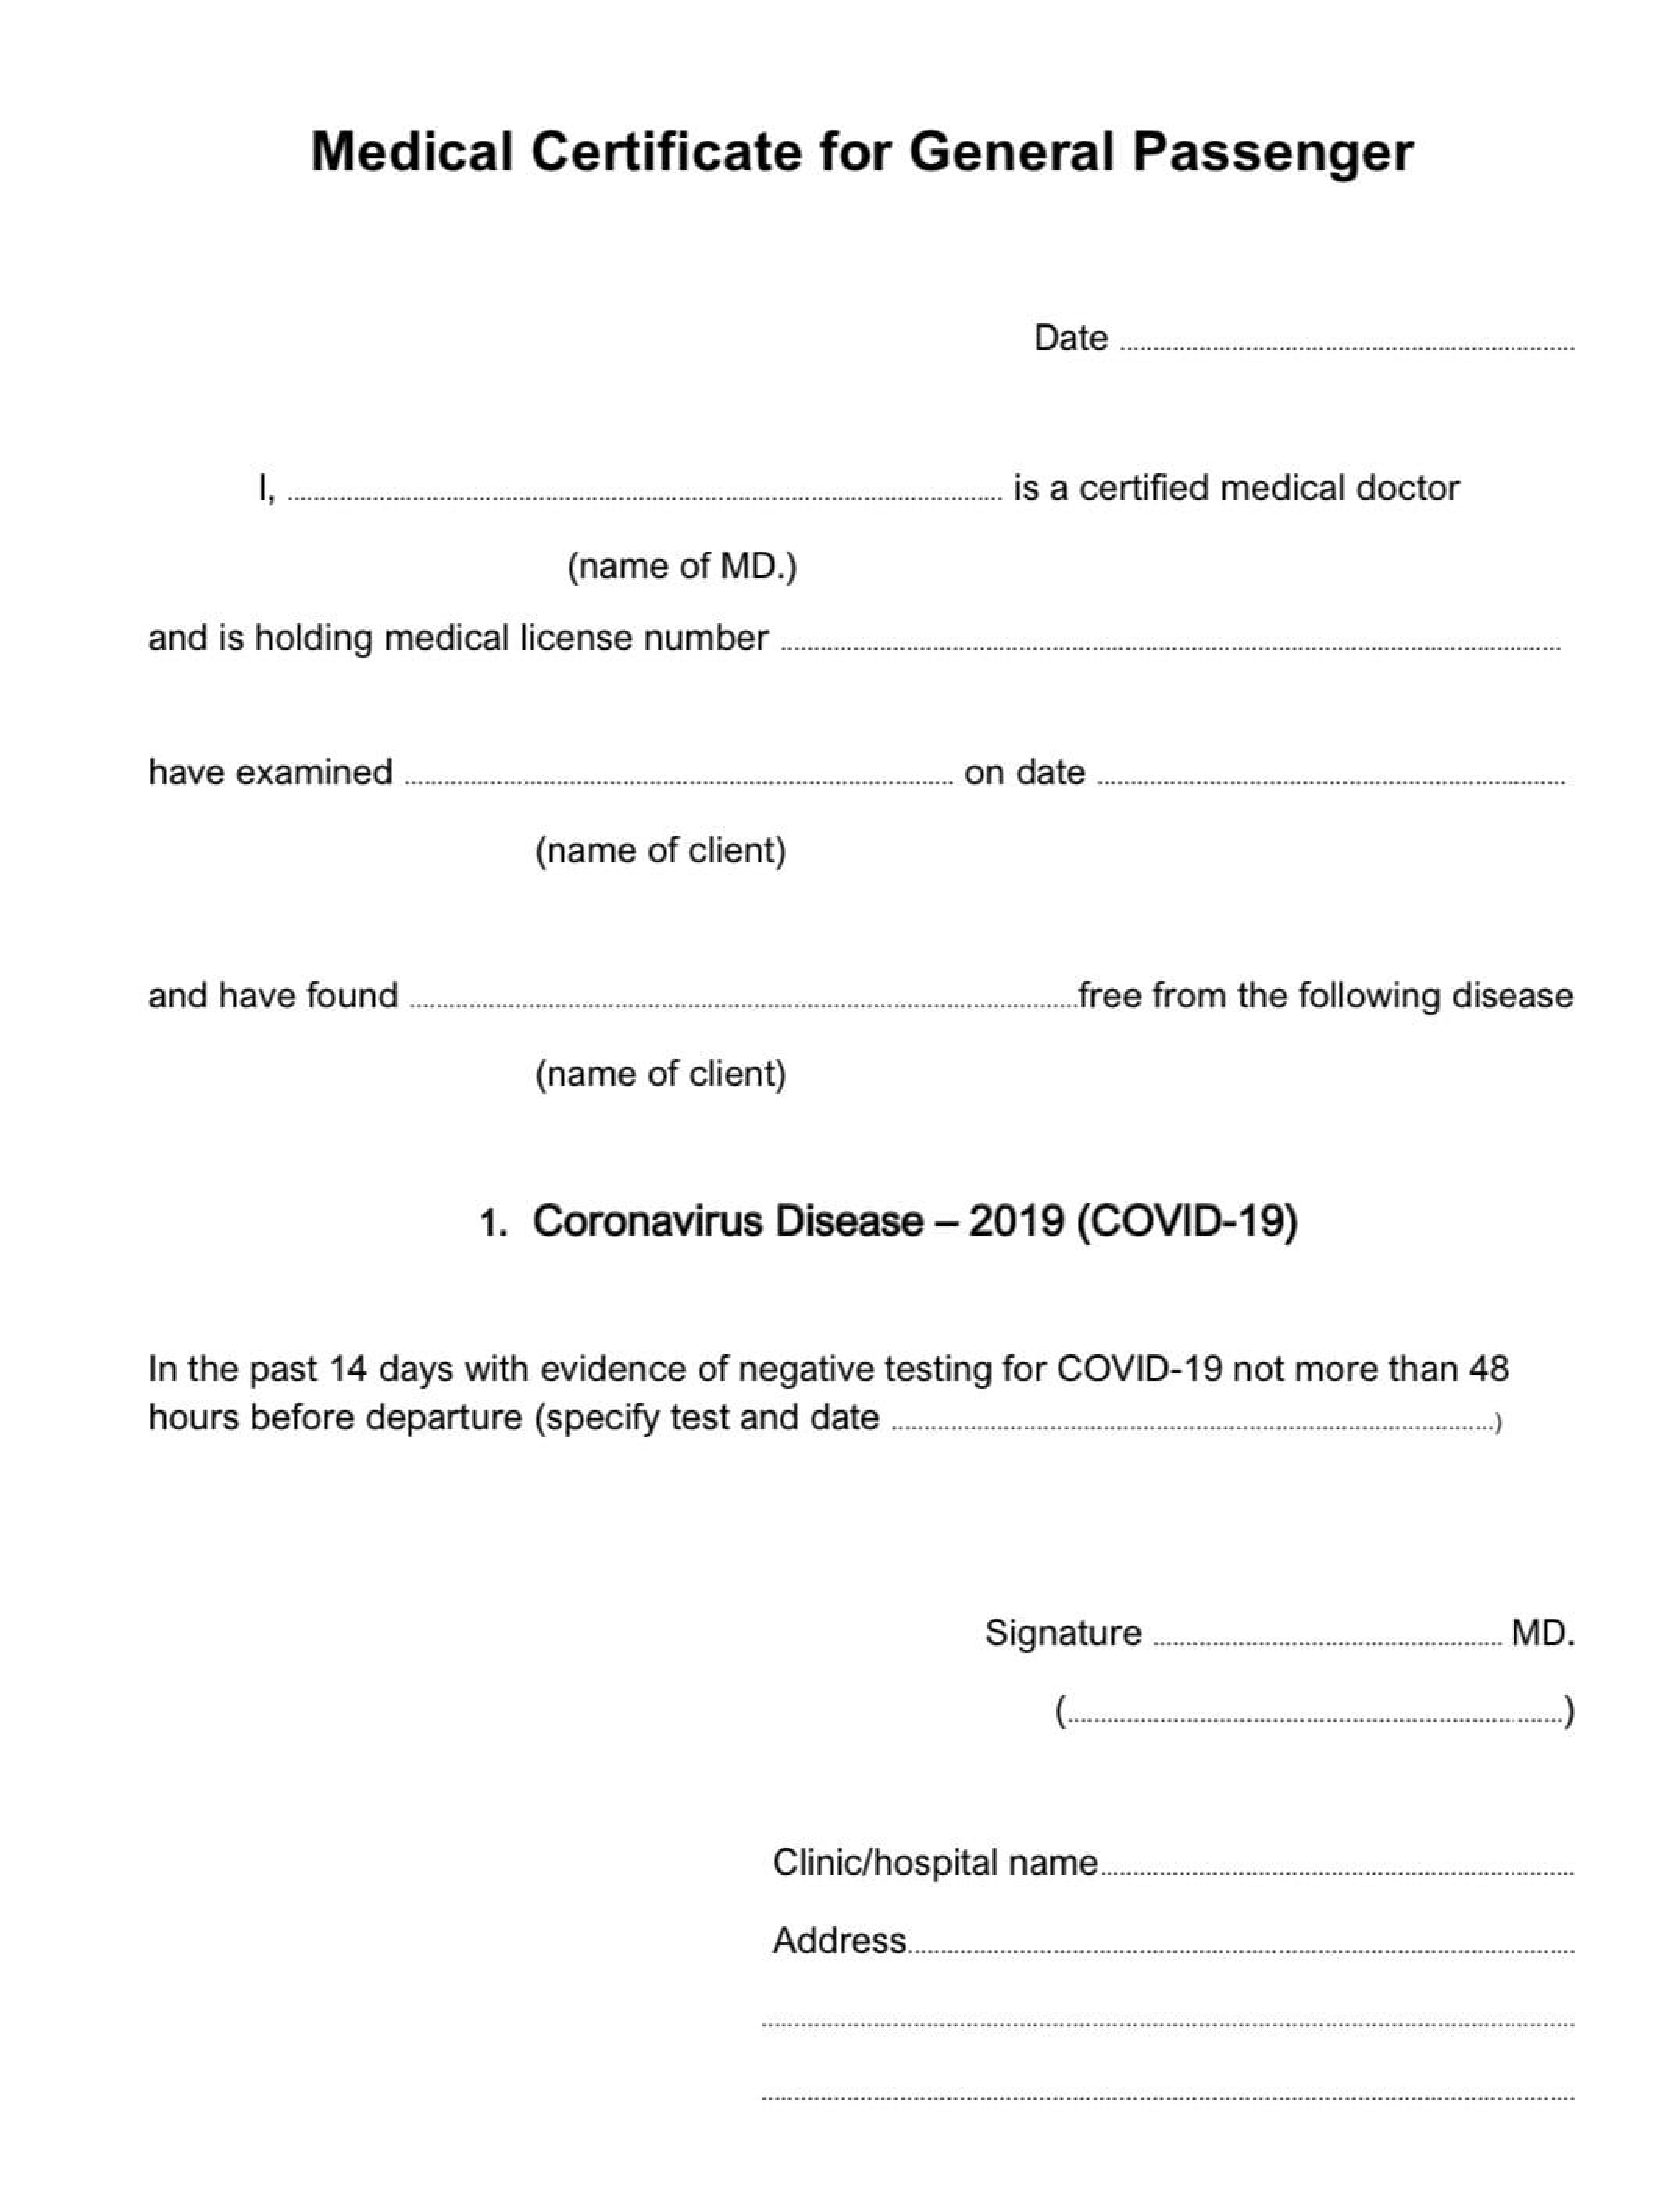 COVID19 Medical Certificate Fit to Fly main image